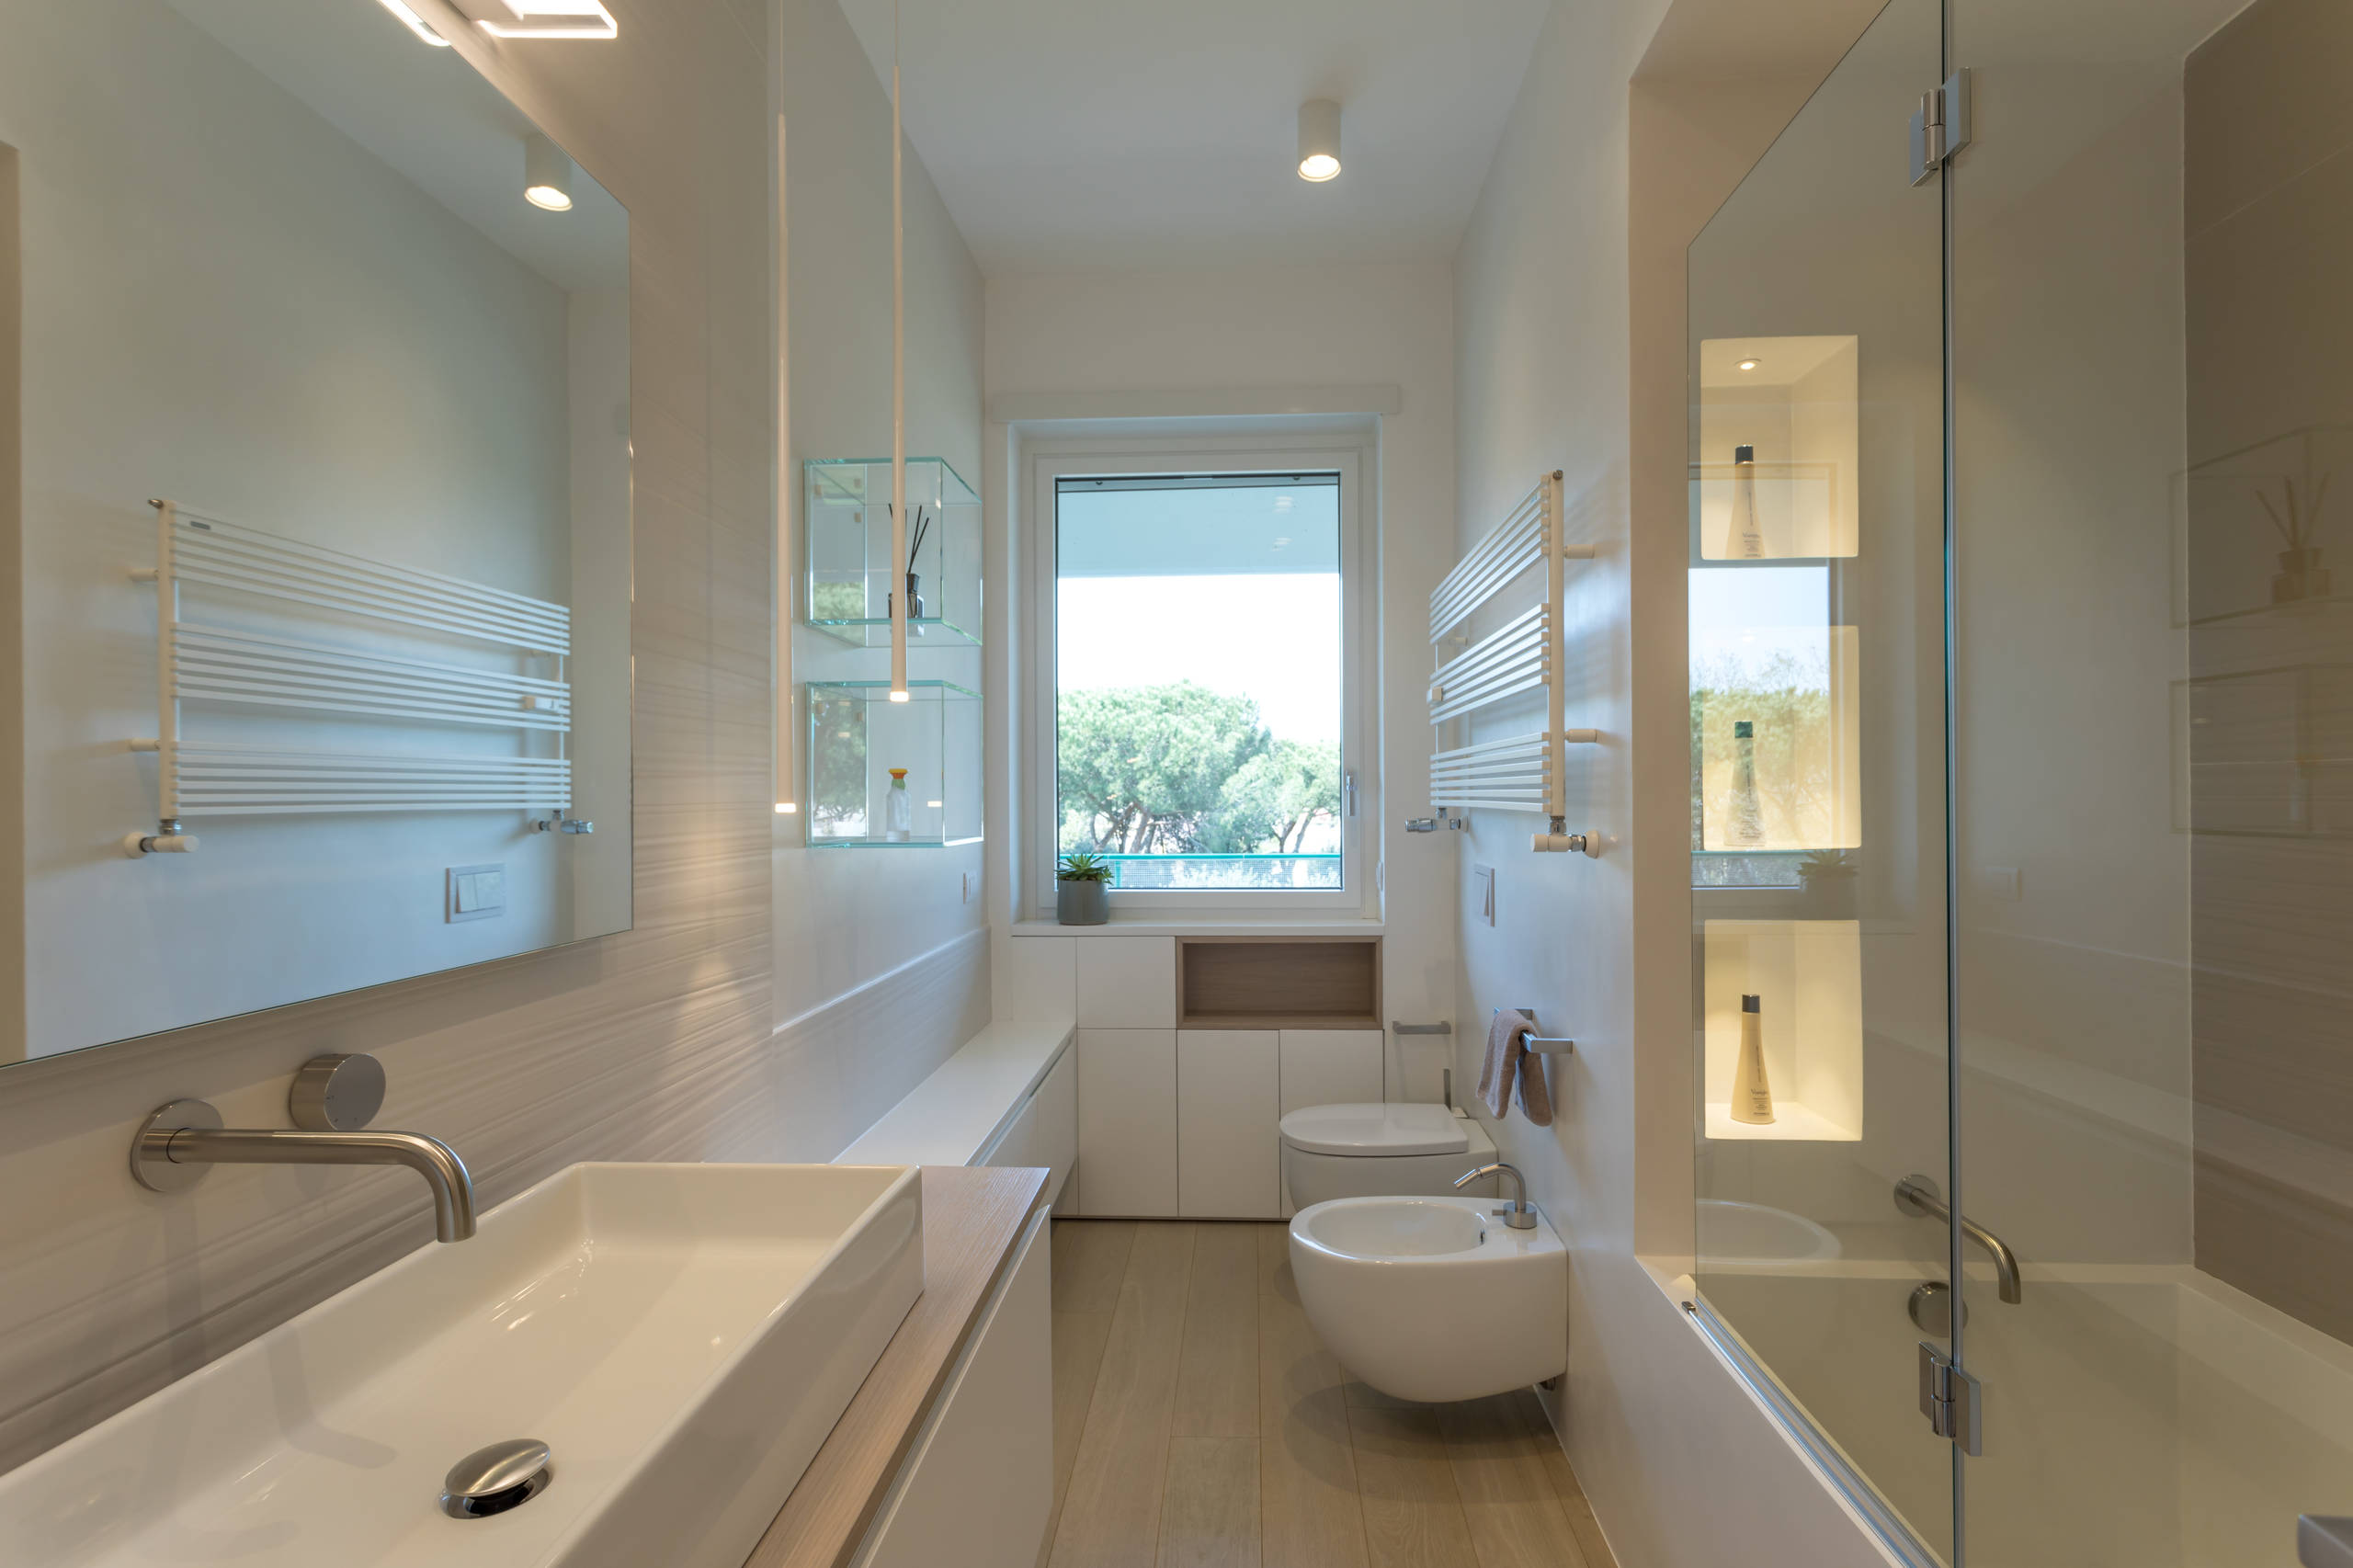 75 Corner Bathtub with Wood Countertops Ideas You'll Love - March, 2023 |  Houzz